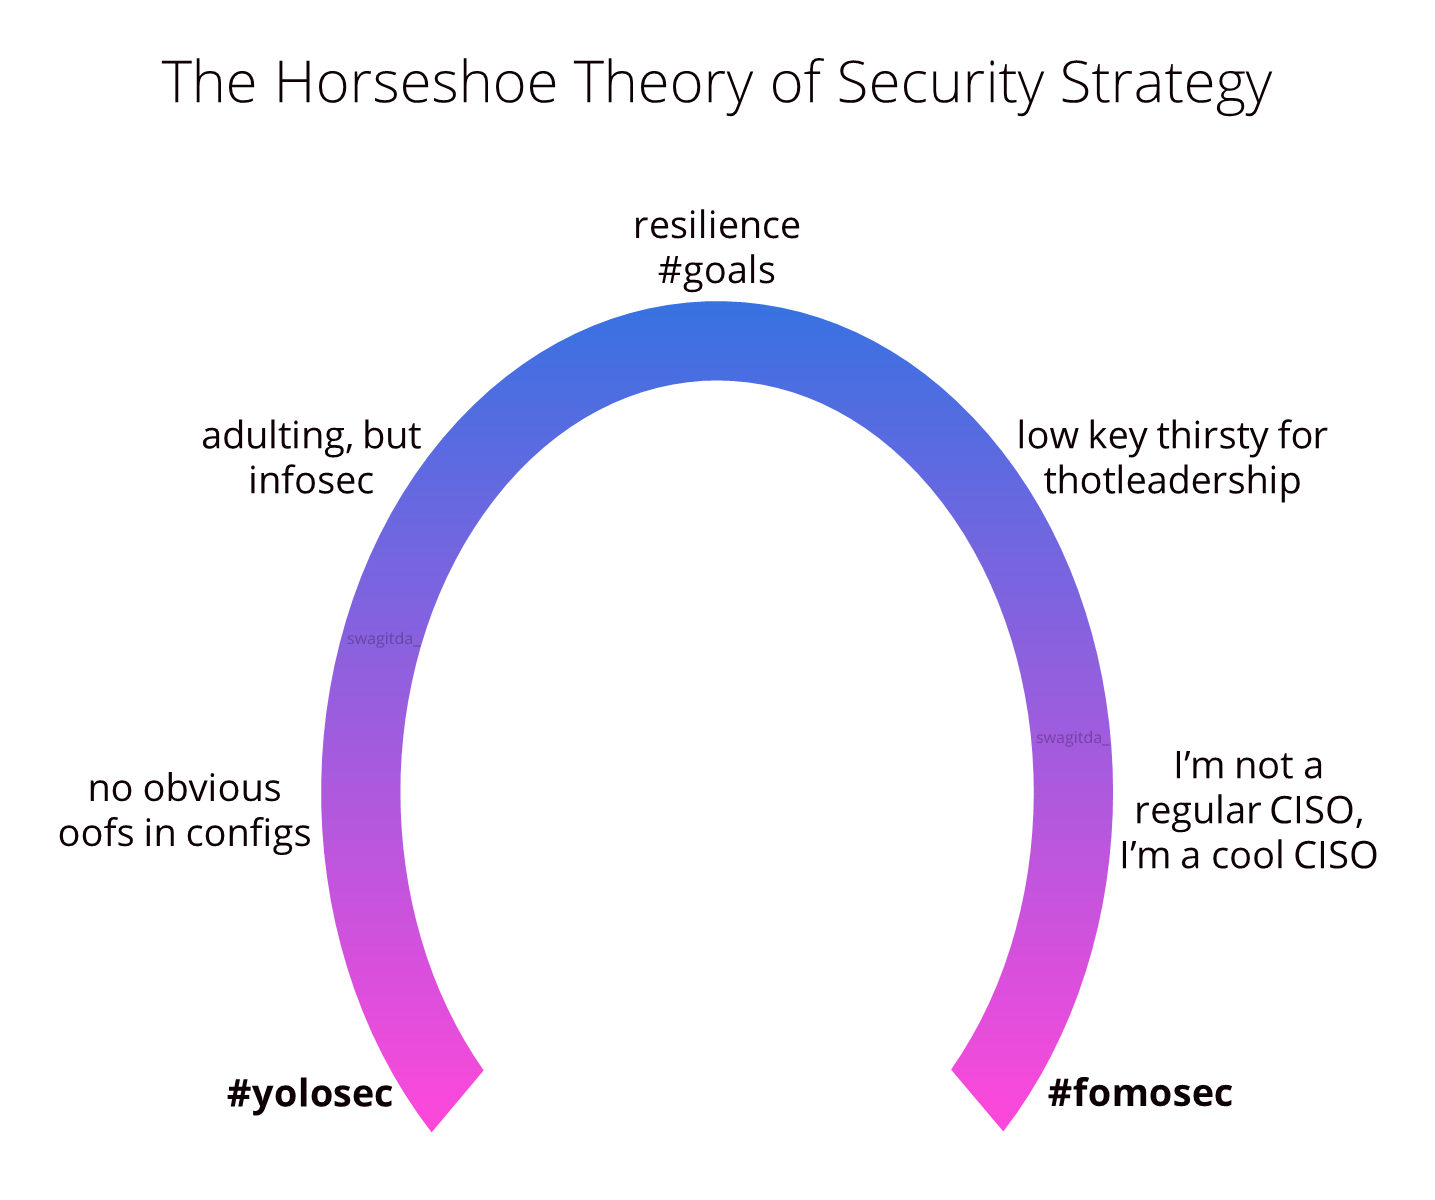 The Horseshoe Theory of Security Strategy by Kelly Shortridge